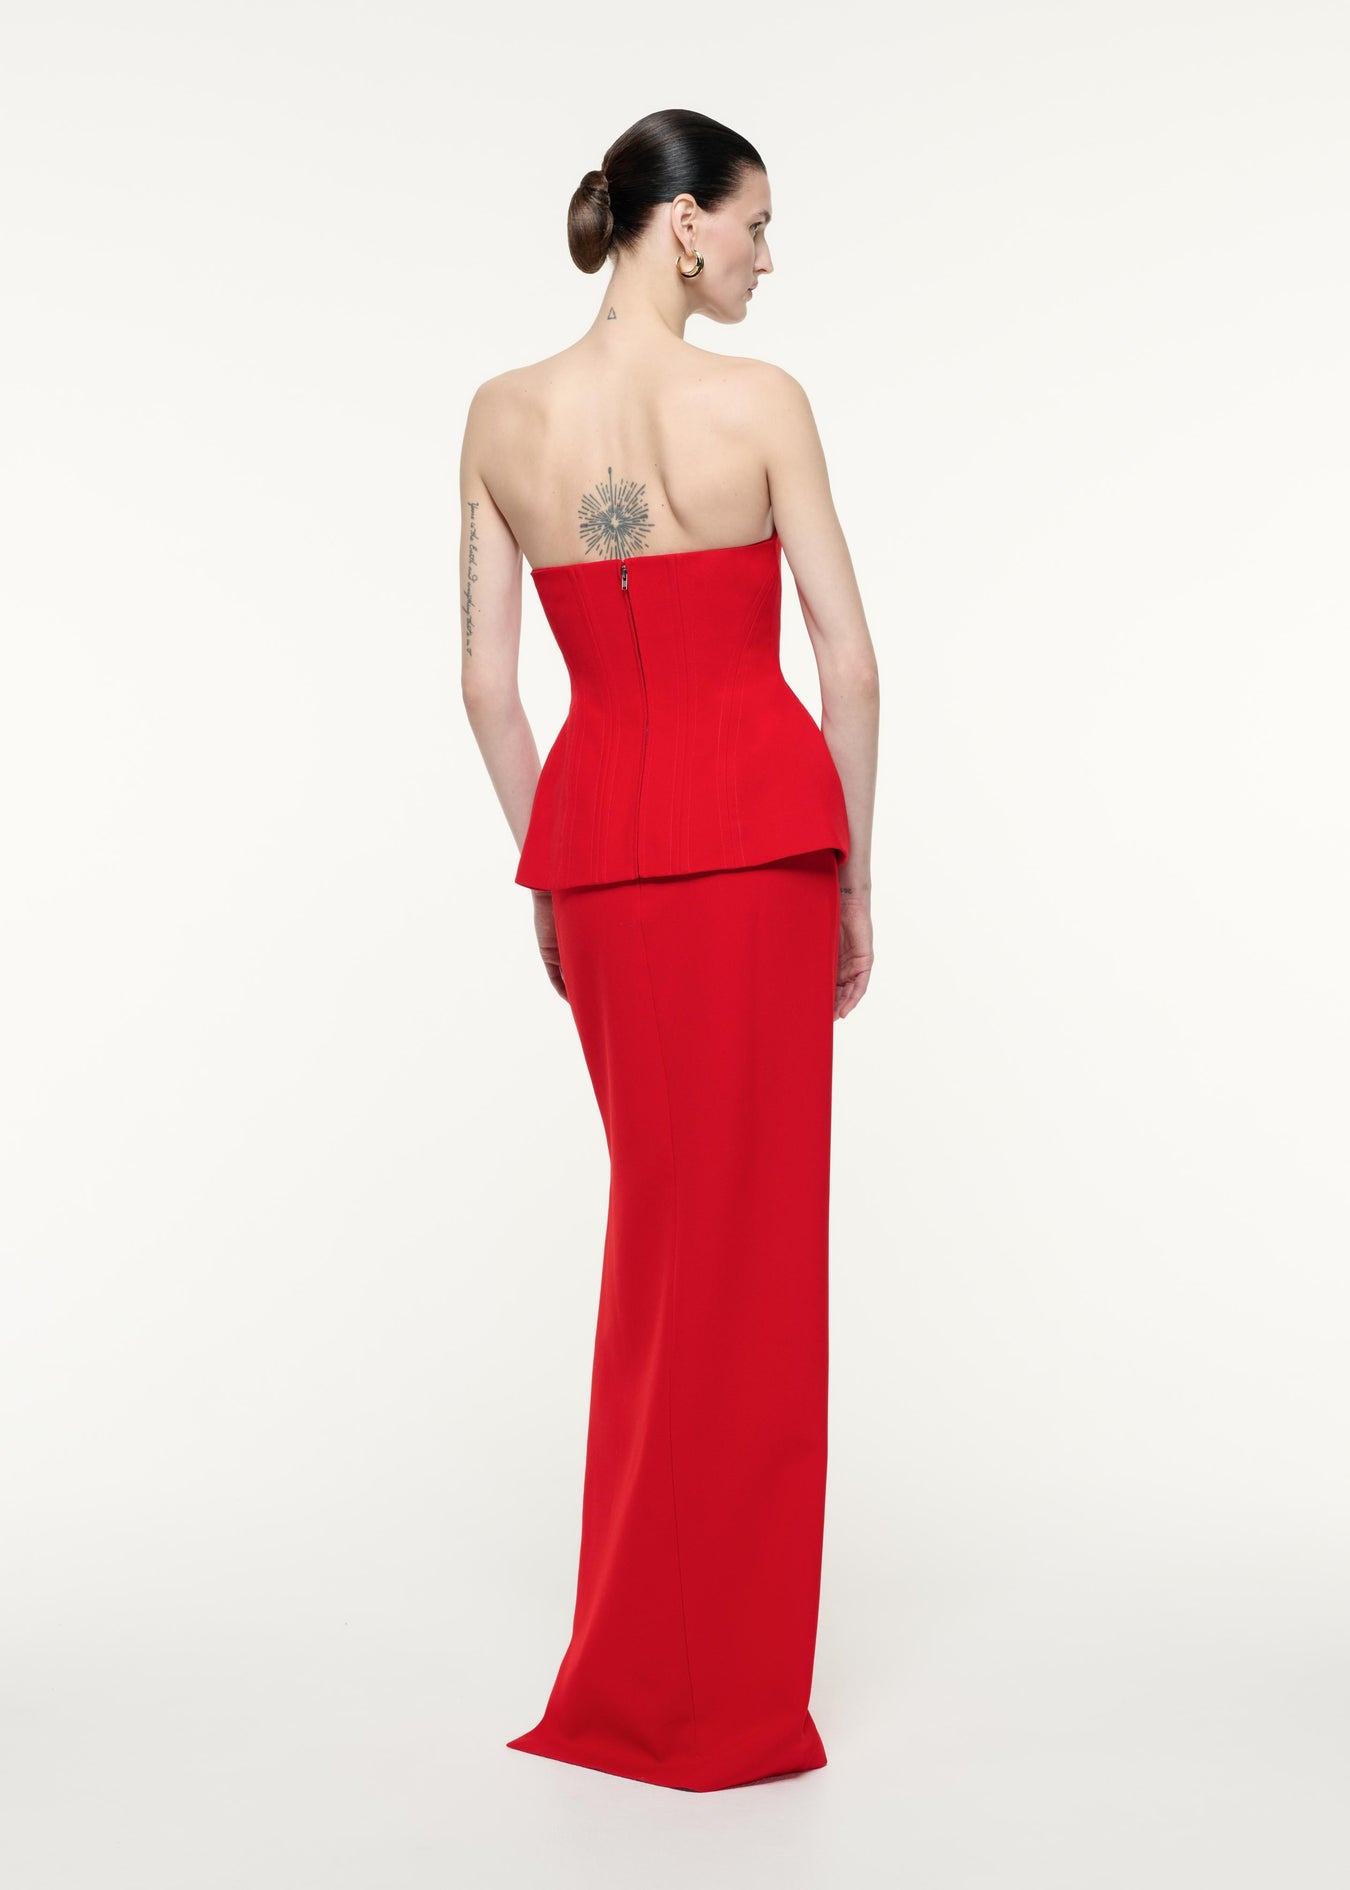 A back view image of a model wearing the Strapless Crepe Gown in Red